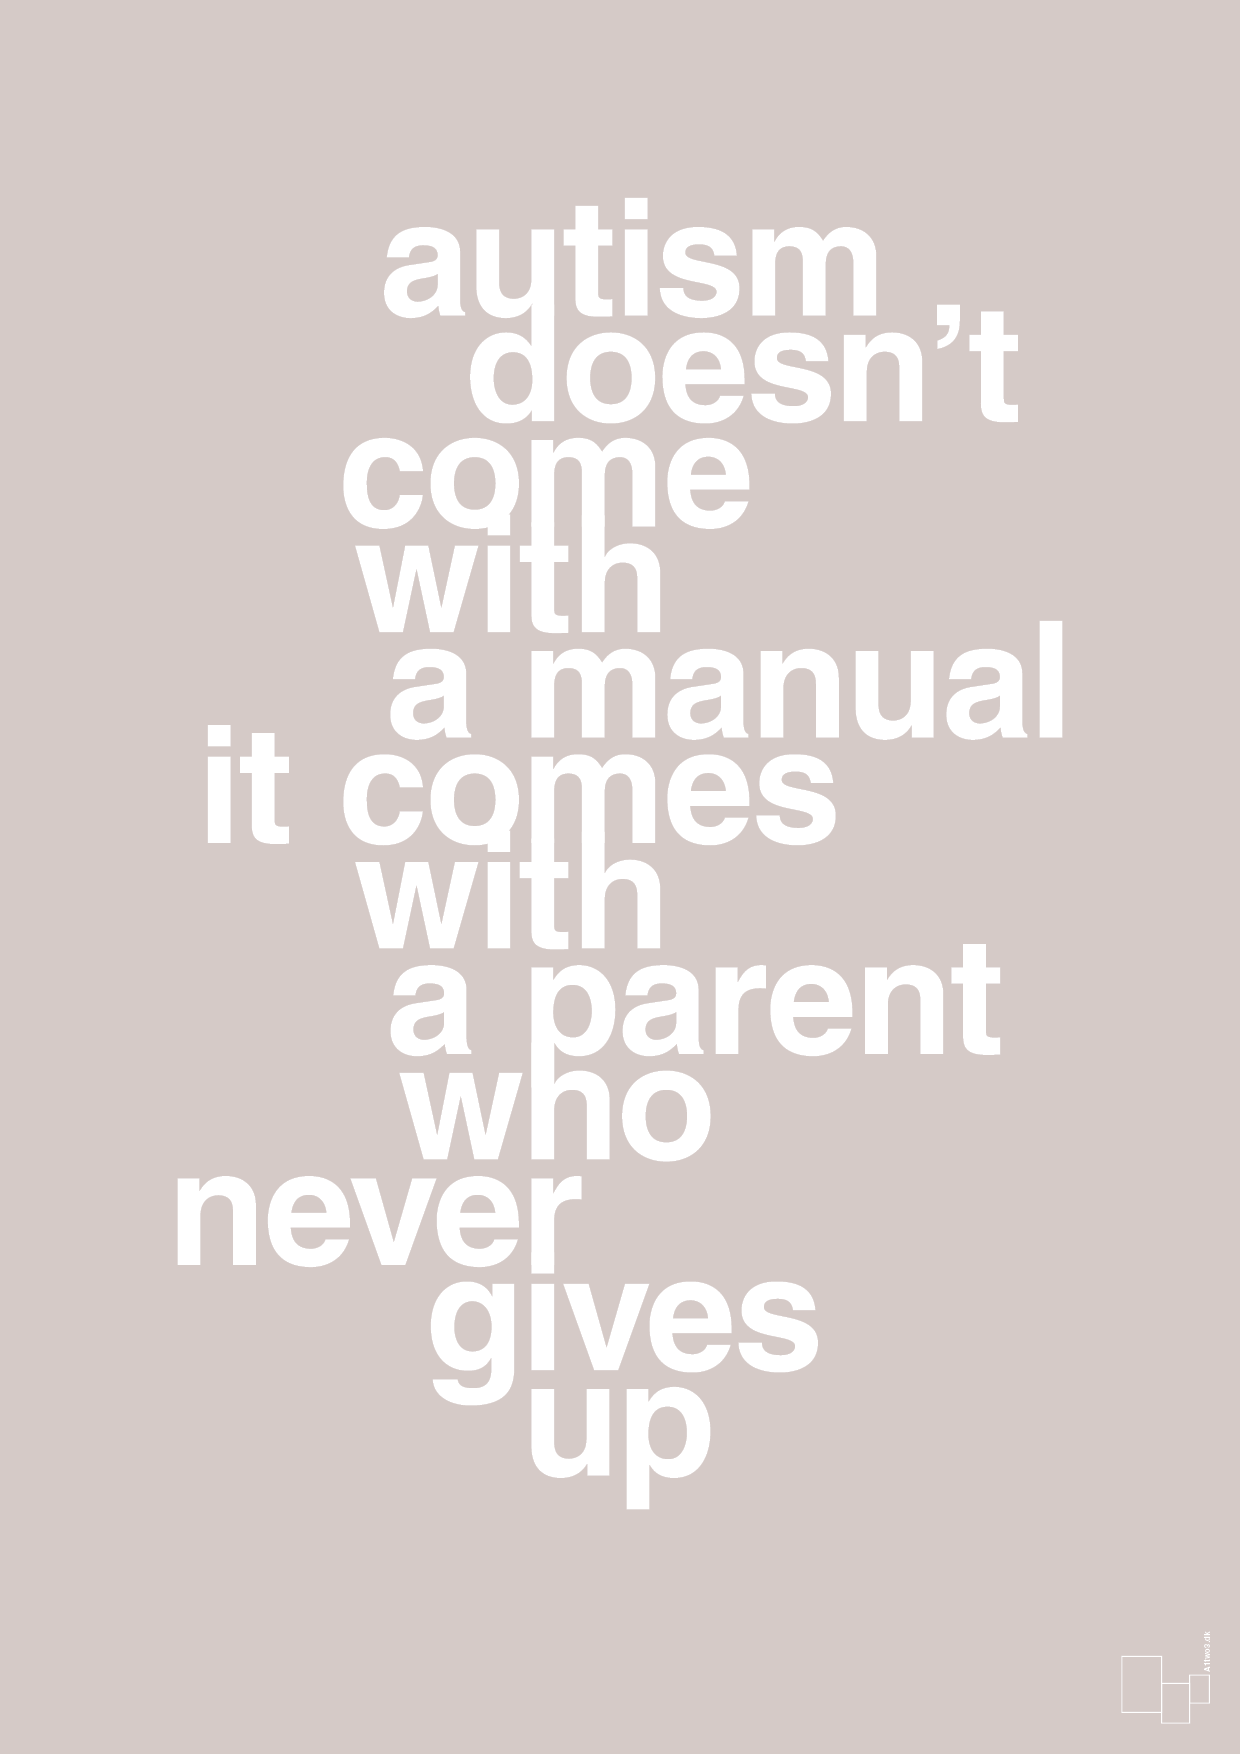 autism doesnt come with a manual it comes with a parent who never gives up - Plakat med Samfund i Broken Beige